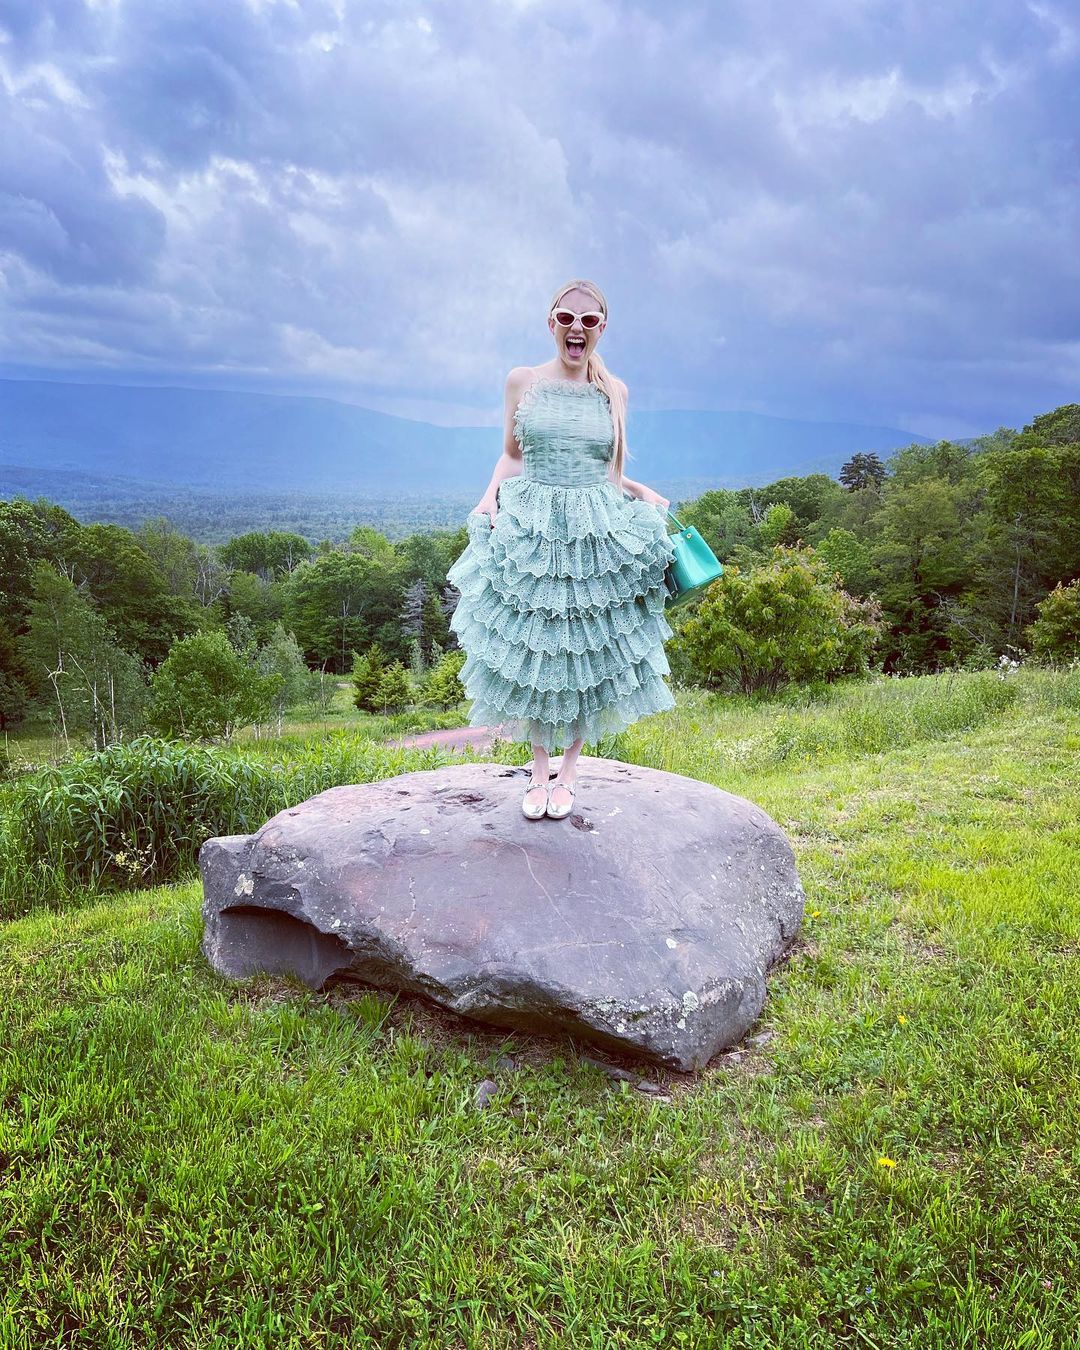 Emma Roberts strikes a silly pose on a rock